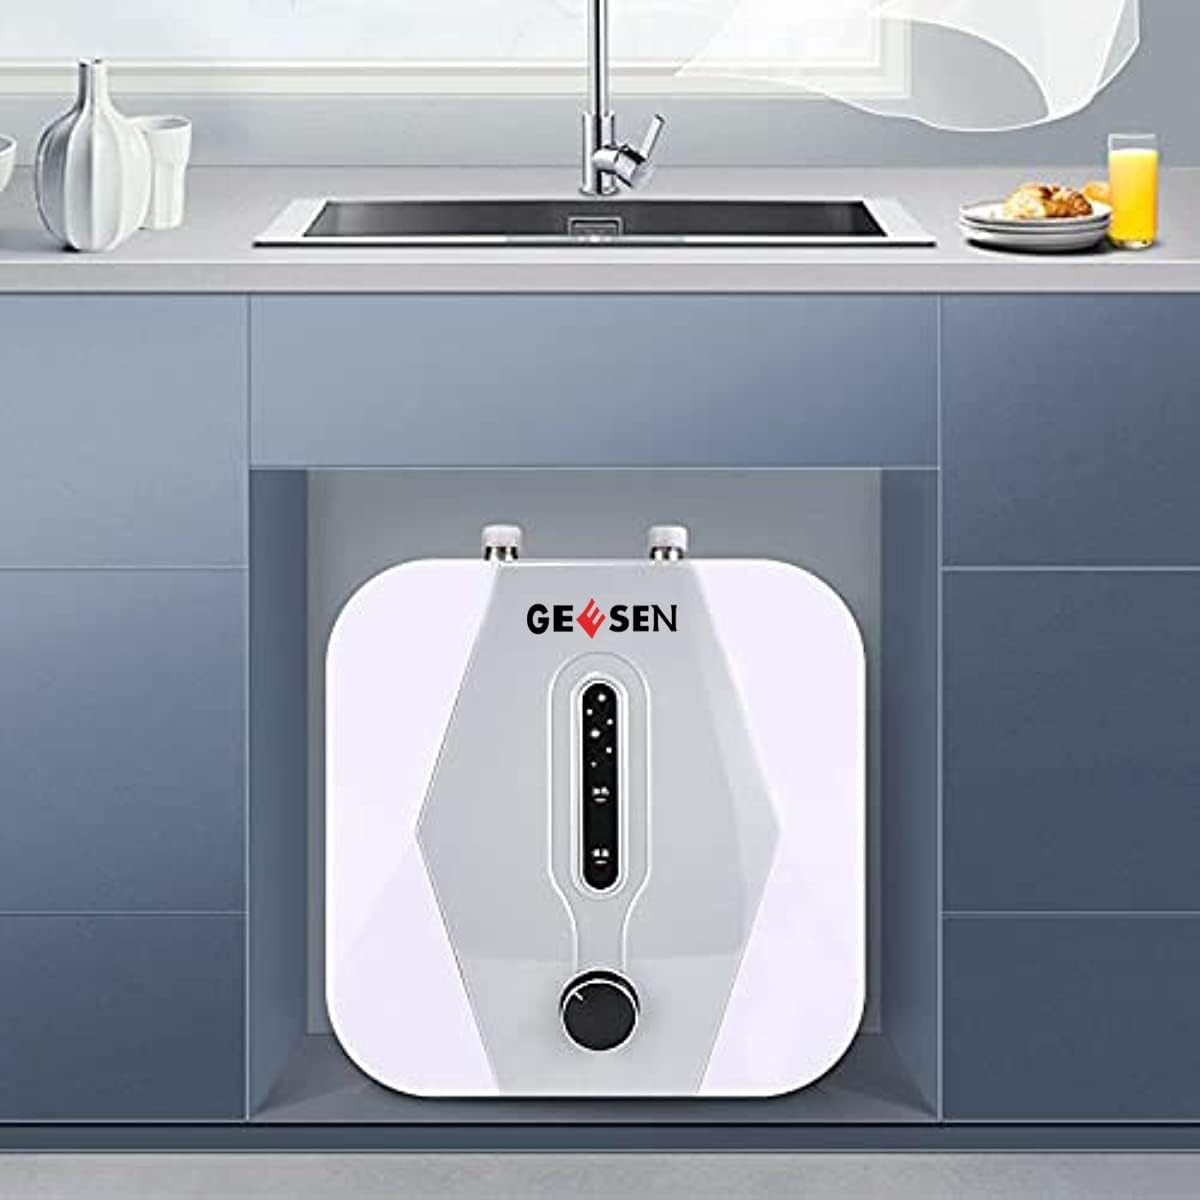 GEESEN 1500W 15L/ 4gallon 110V US Plug Compact Size Instant Electric Tank Home Hot Water Heater Kitchens Hair Salons IPX4 Mini Instant Tankless Shower for Kitchen Bathroom